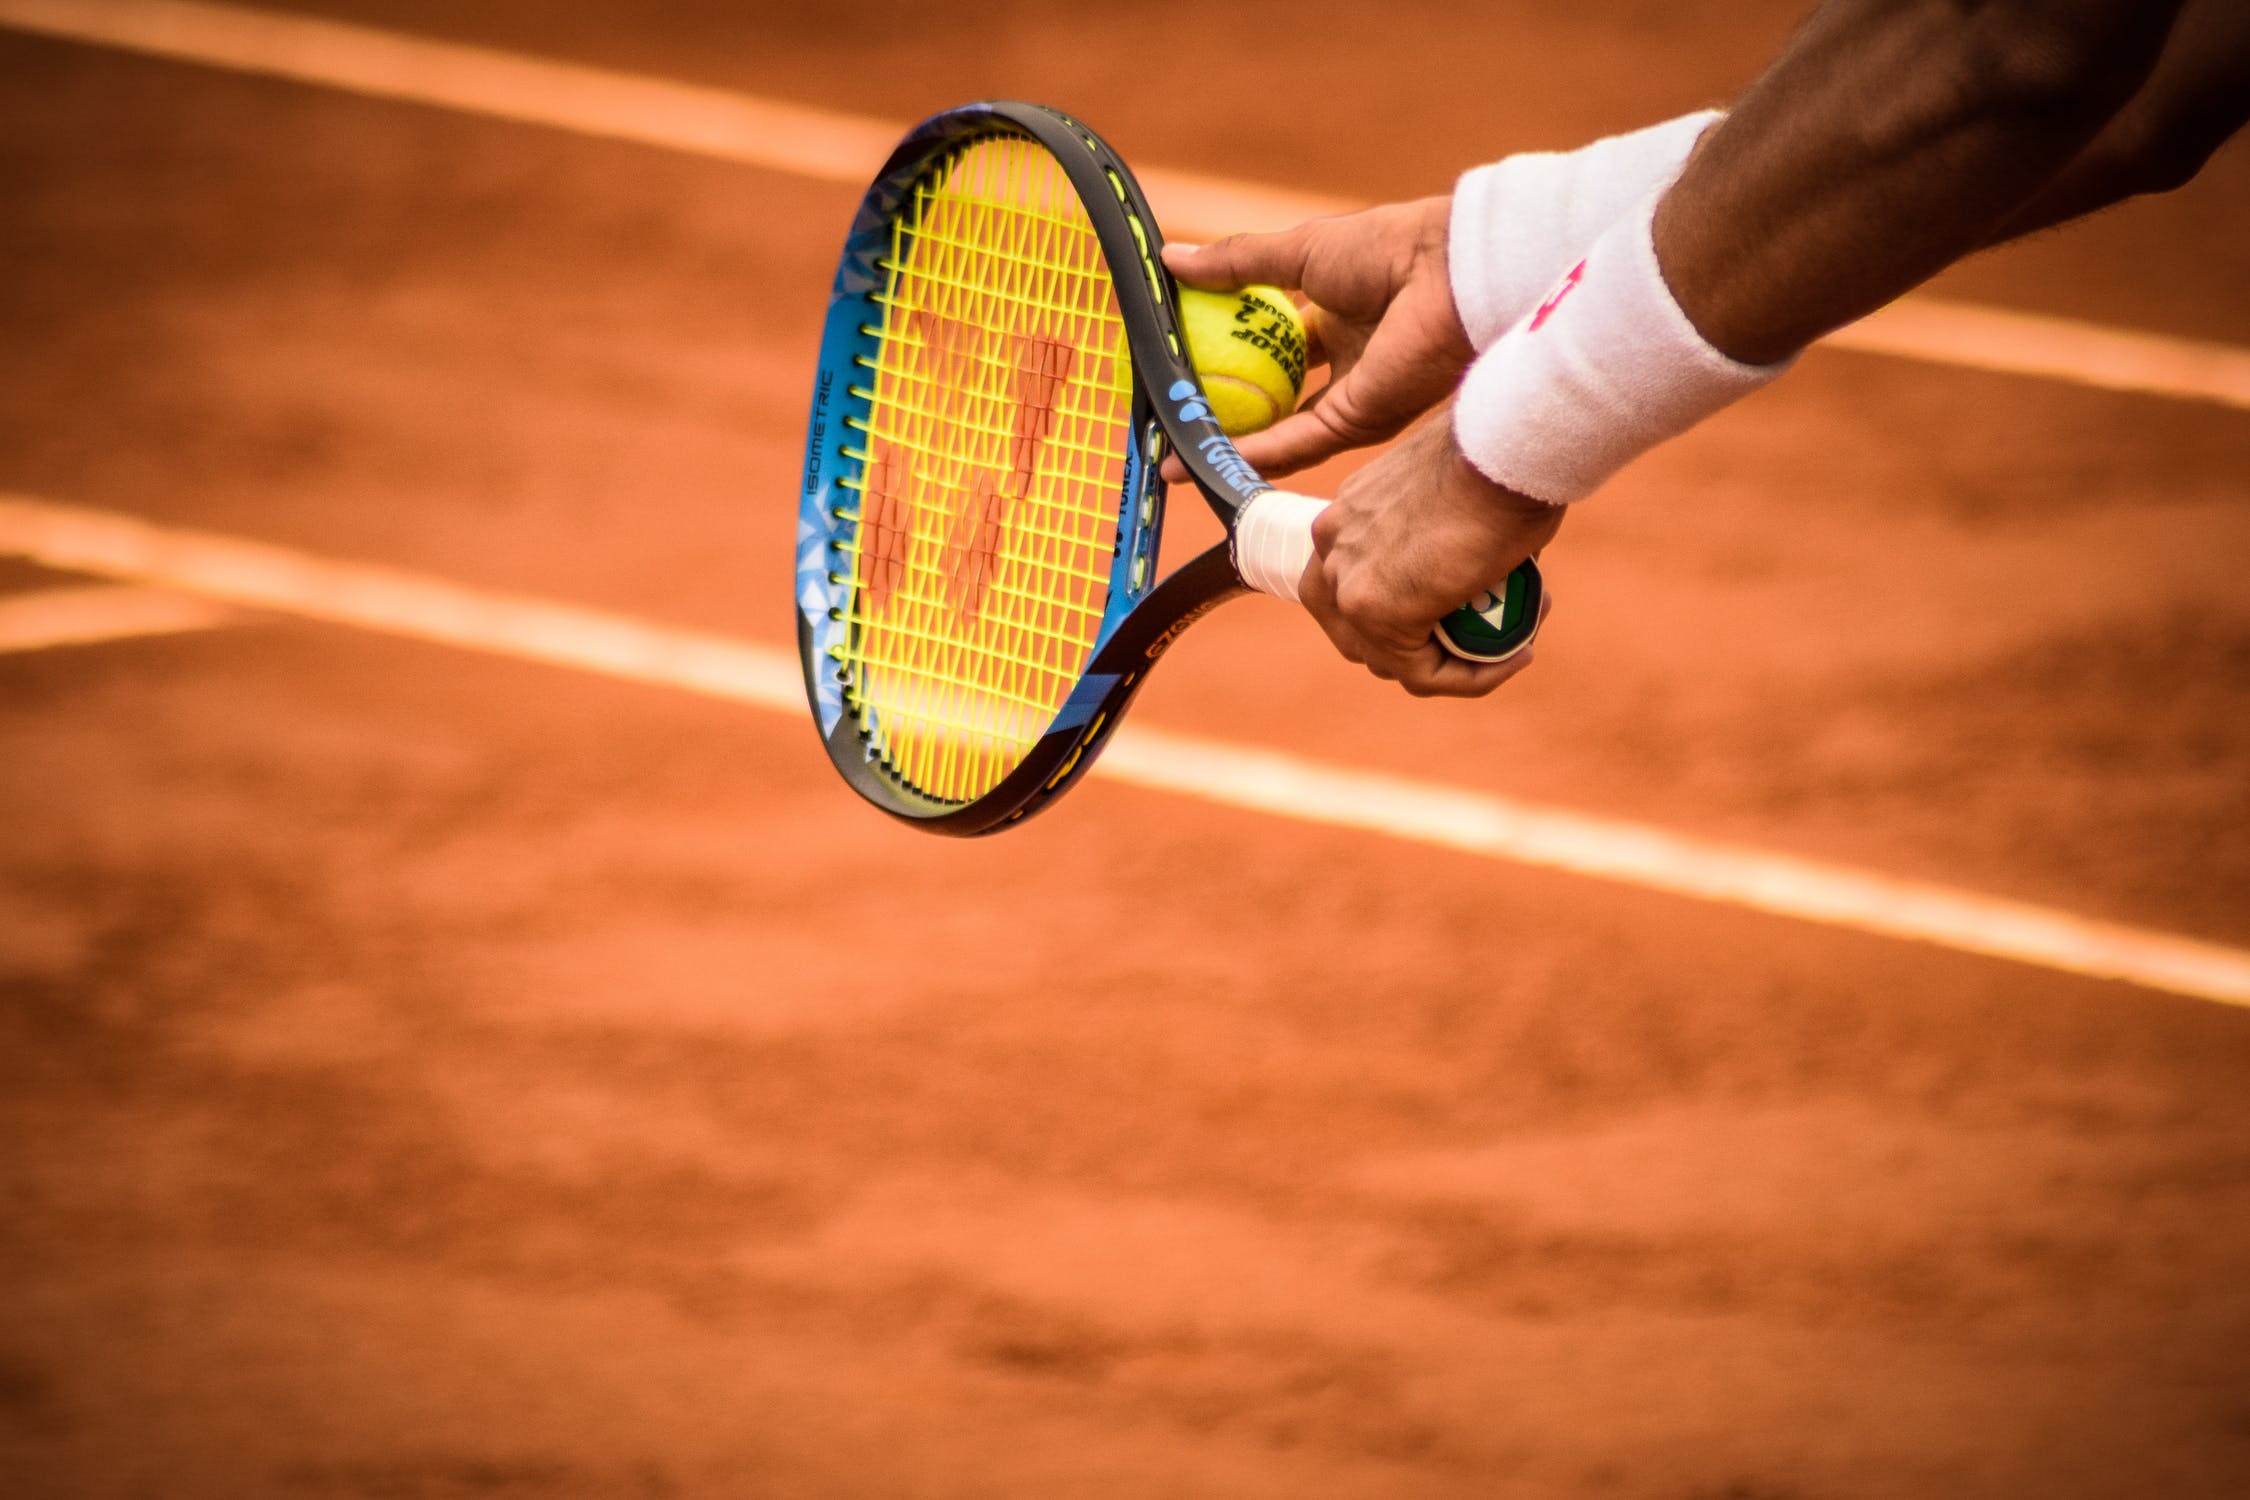 Get Active With Cardio Tennis At Virgin Active